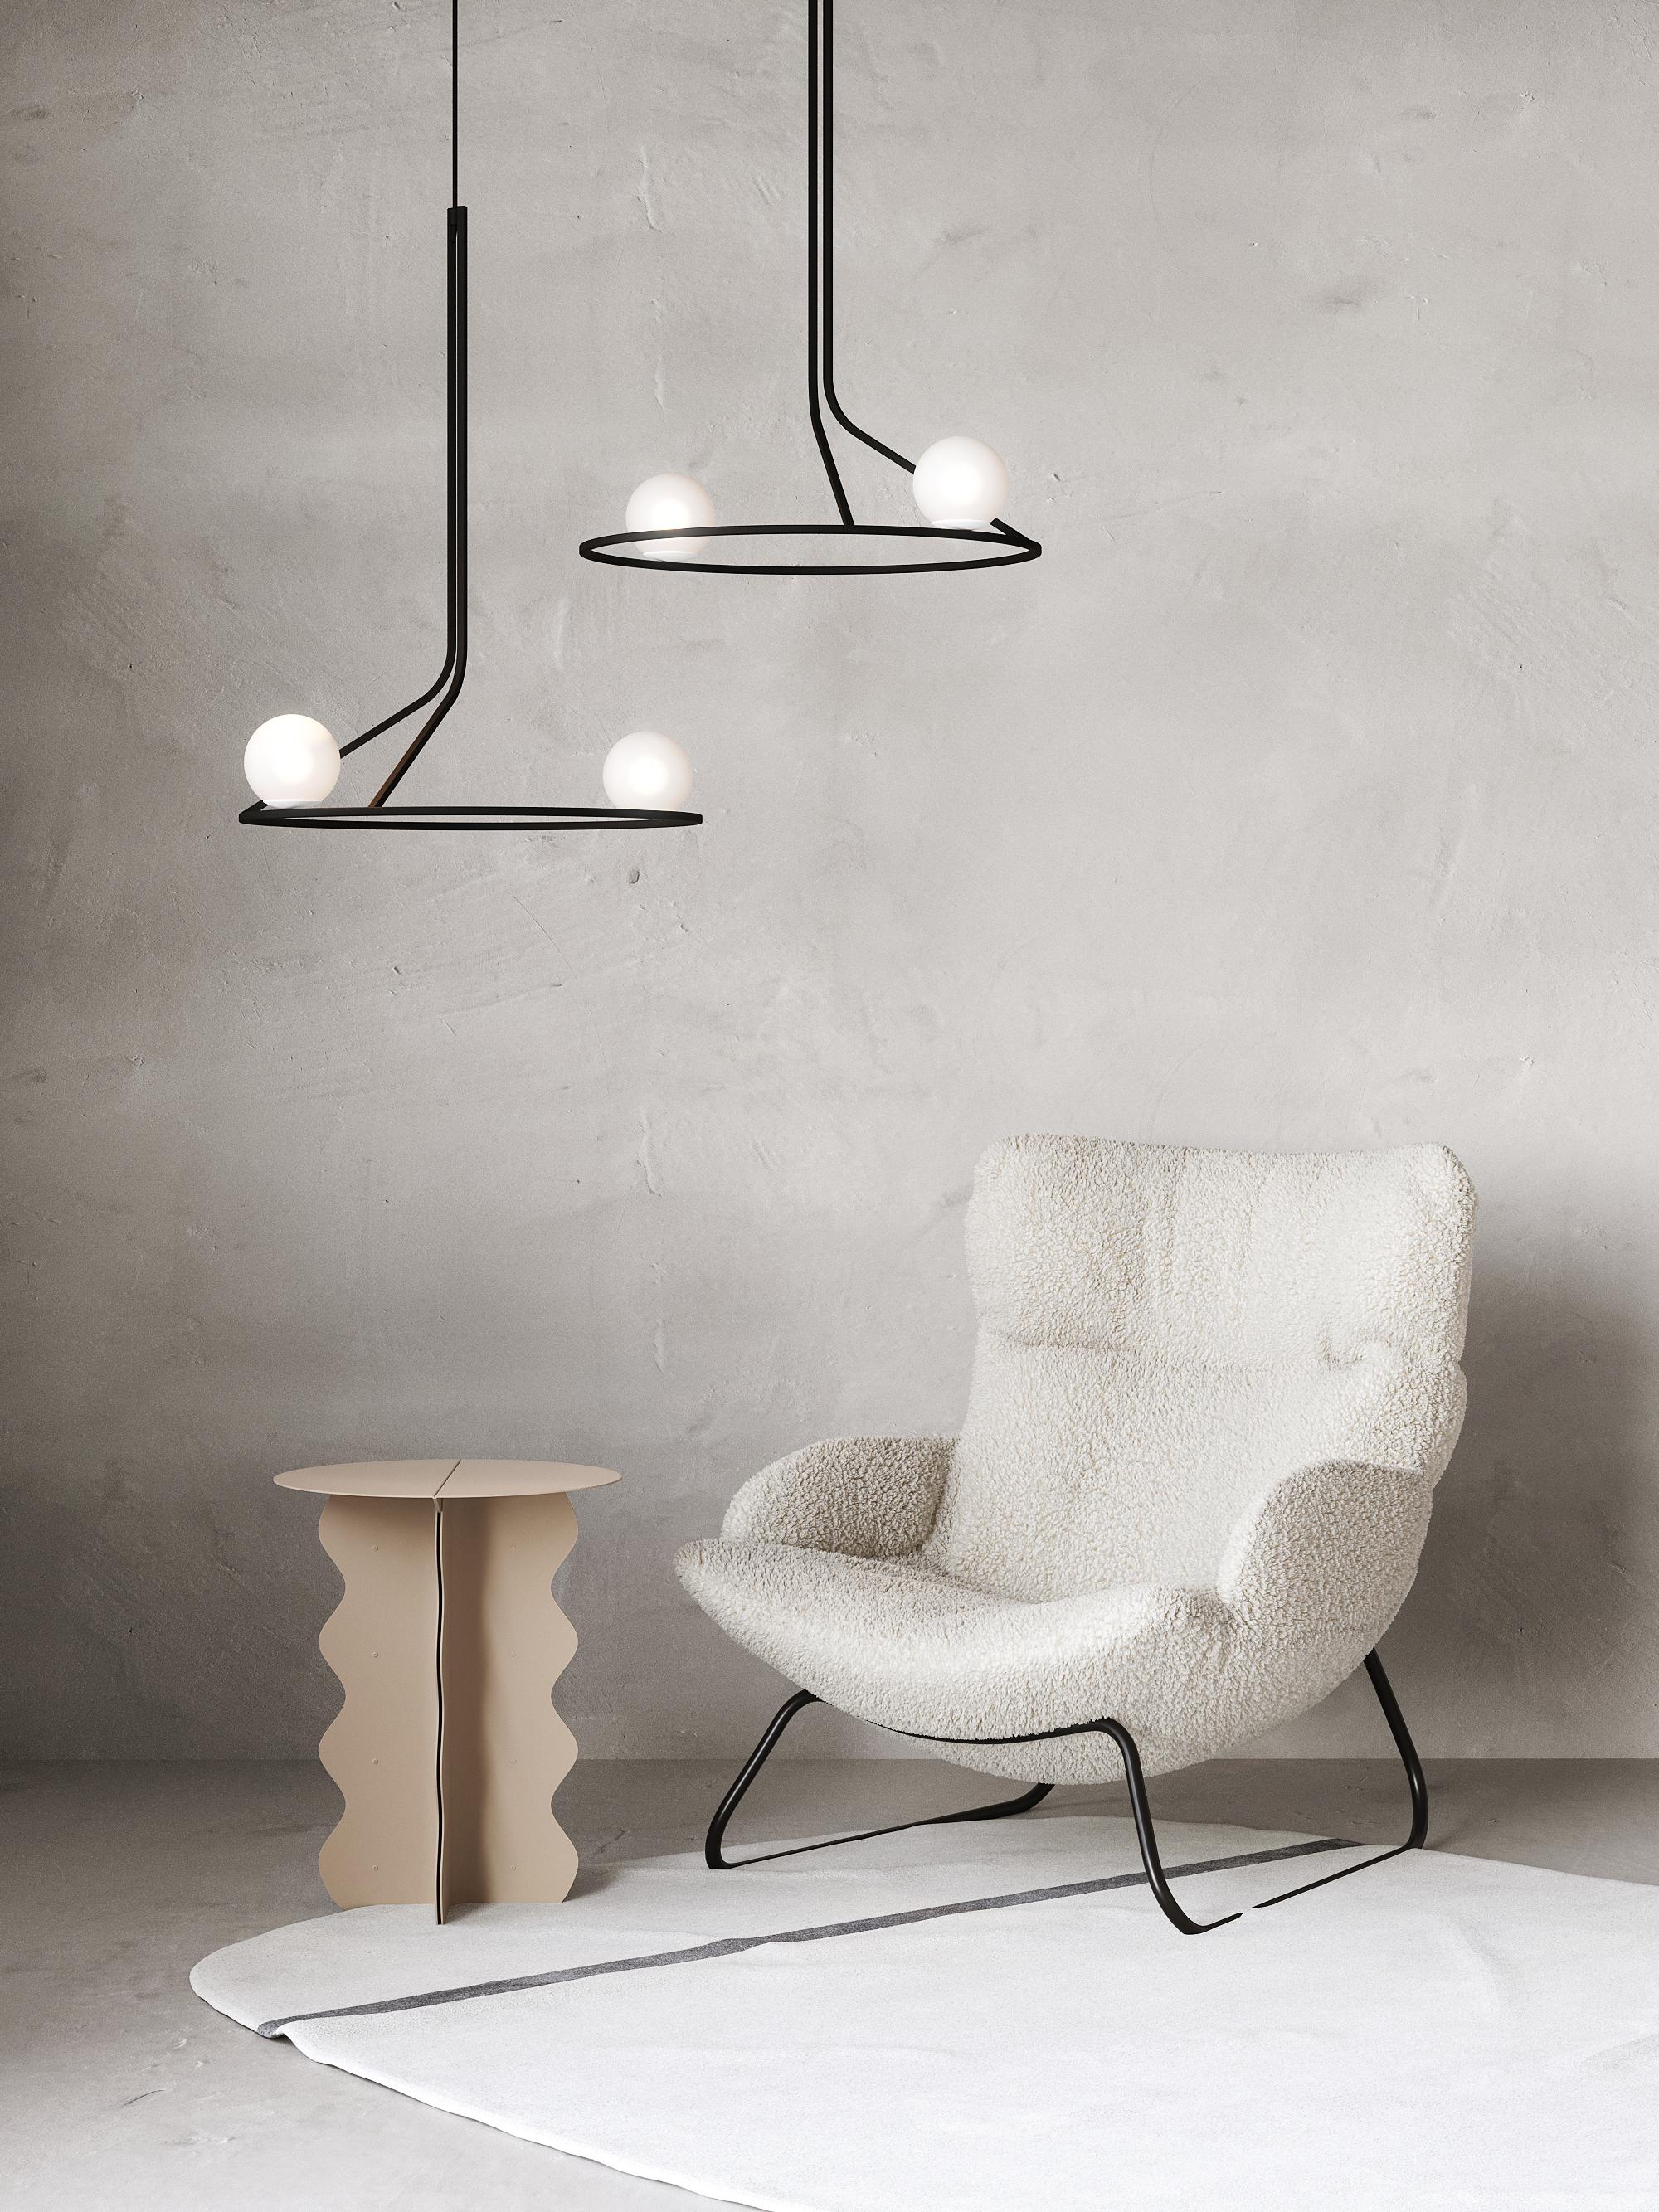 NA LINII
pendant lamp

DESCRIPTION
It is a charismatic product that should not be perceived literally, but with a goal to distinguish the symbolism and image of the source.

Pure geometric figures build the lighting fixture; rectangle lines and a